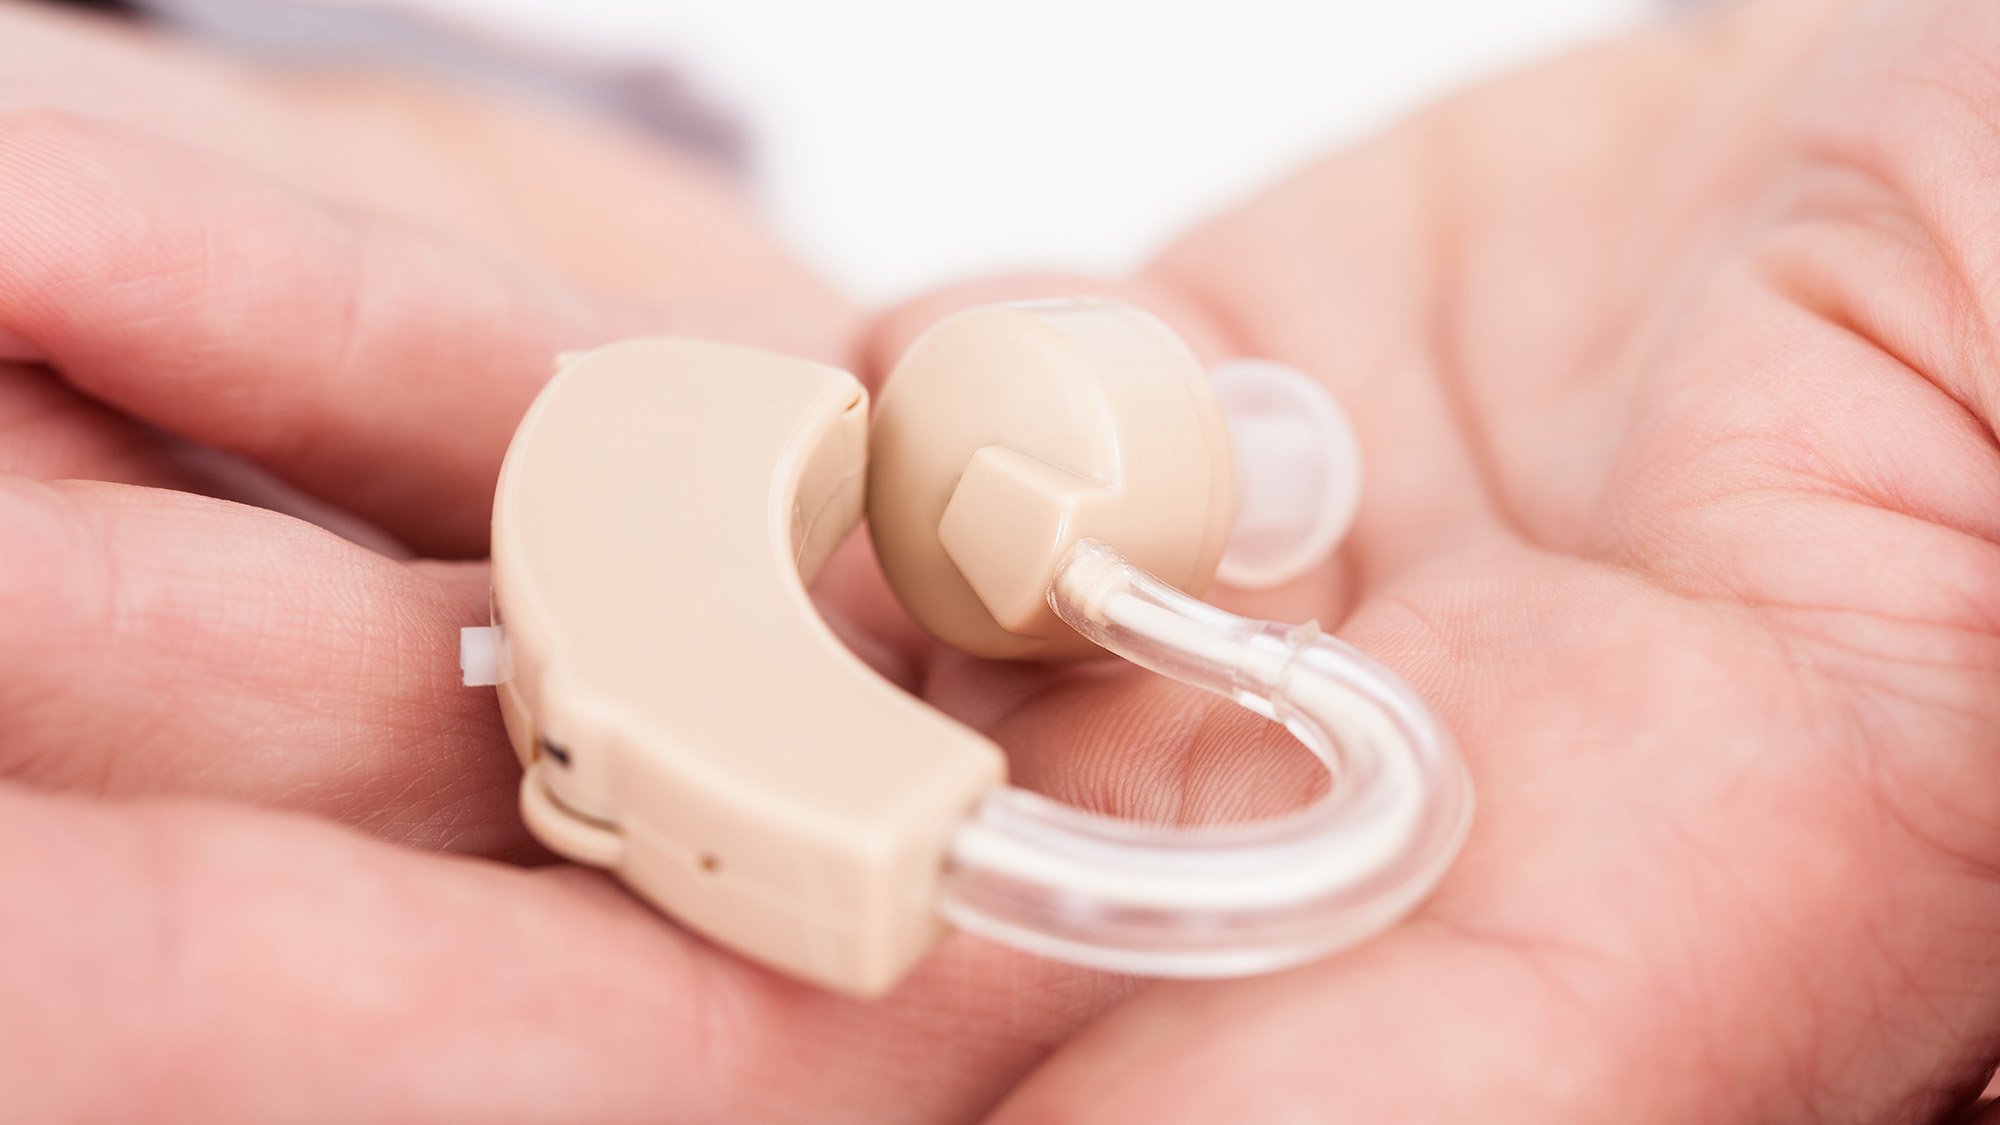 The dos and donâts of caring for your hearing aids